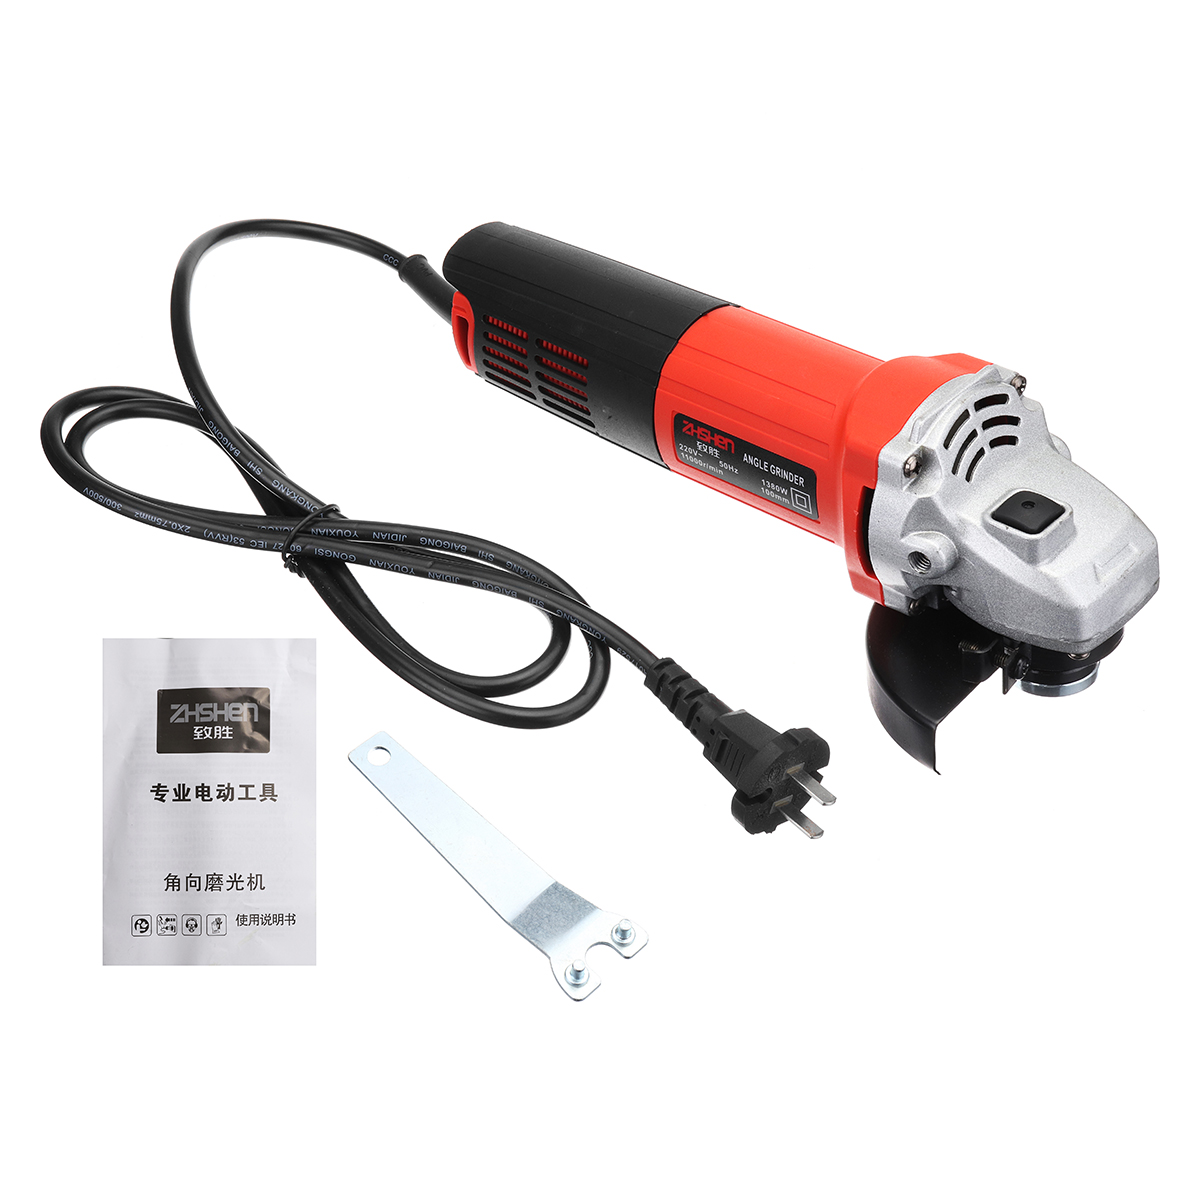 

220V/50Hz 1380W 11000r/min Angle Grinder Electric Angle Grinding Cutter Cut Off Power Tool